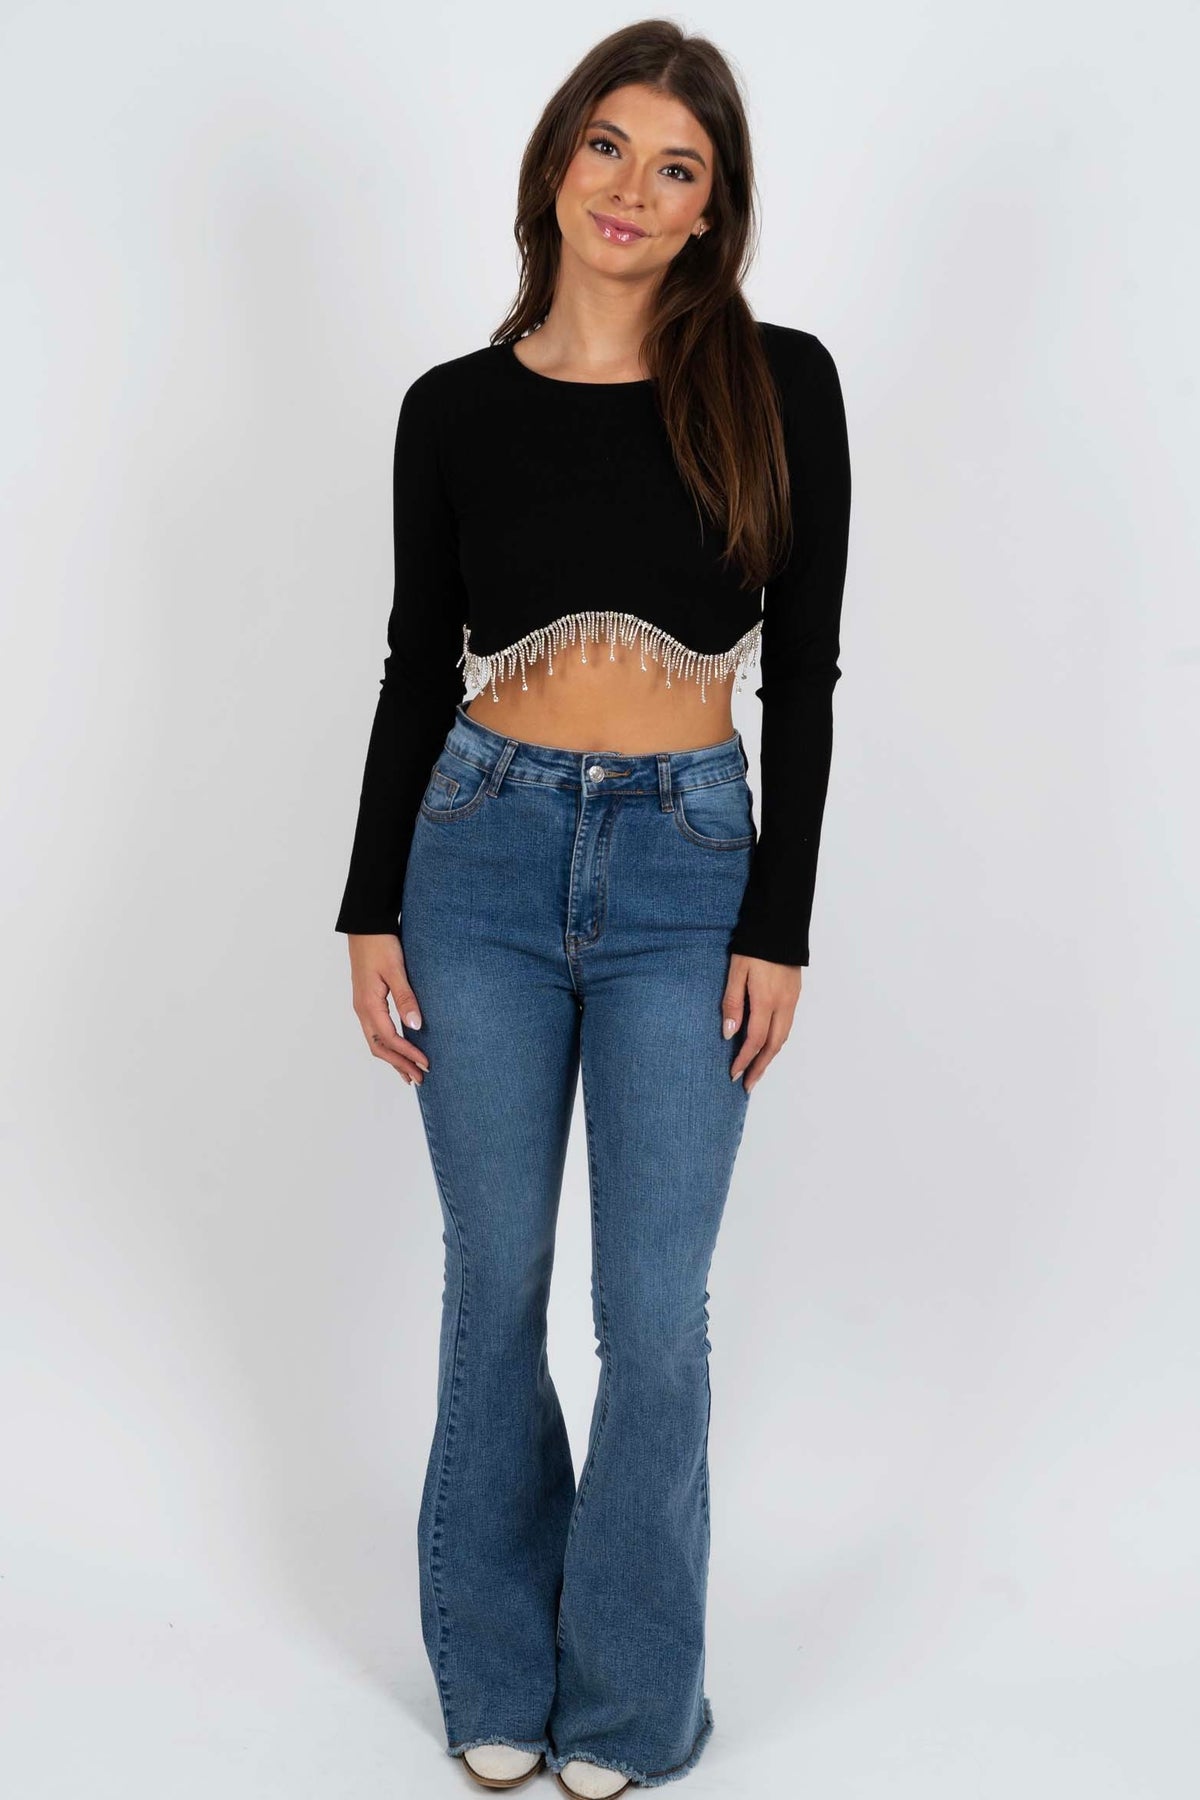 Over It All Top (Black)